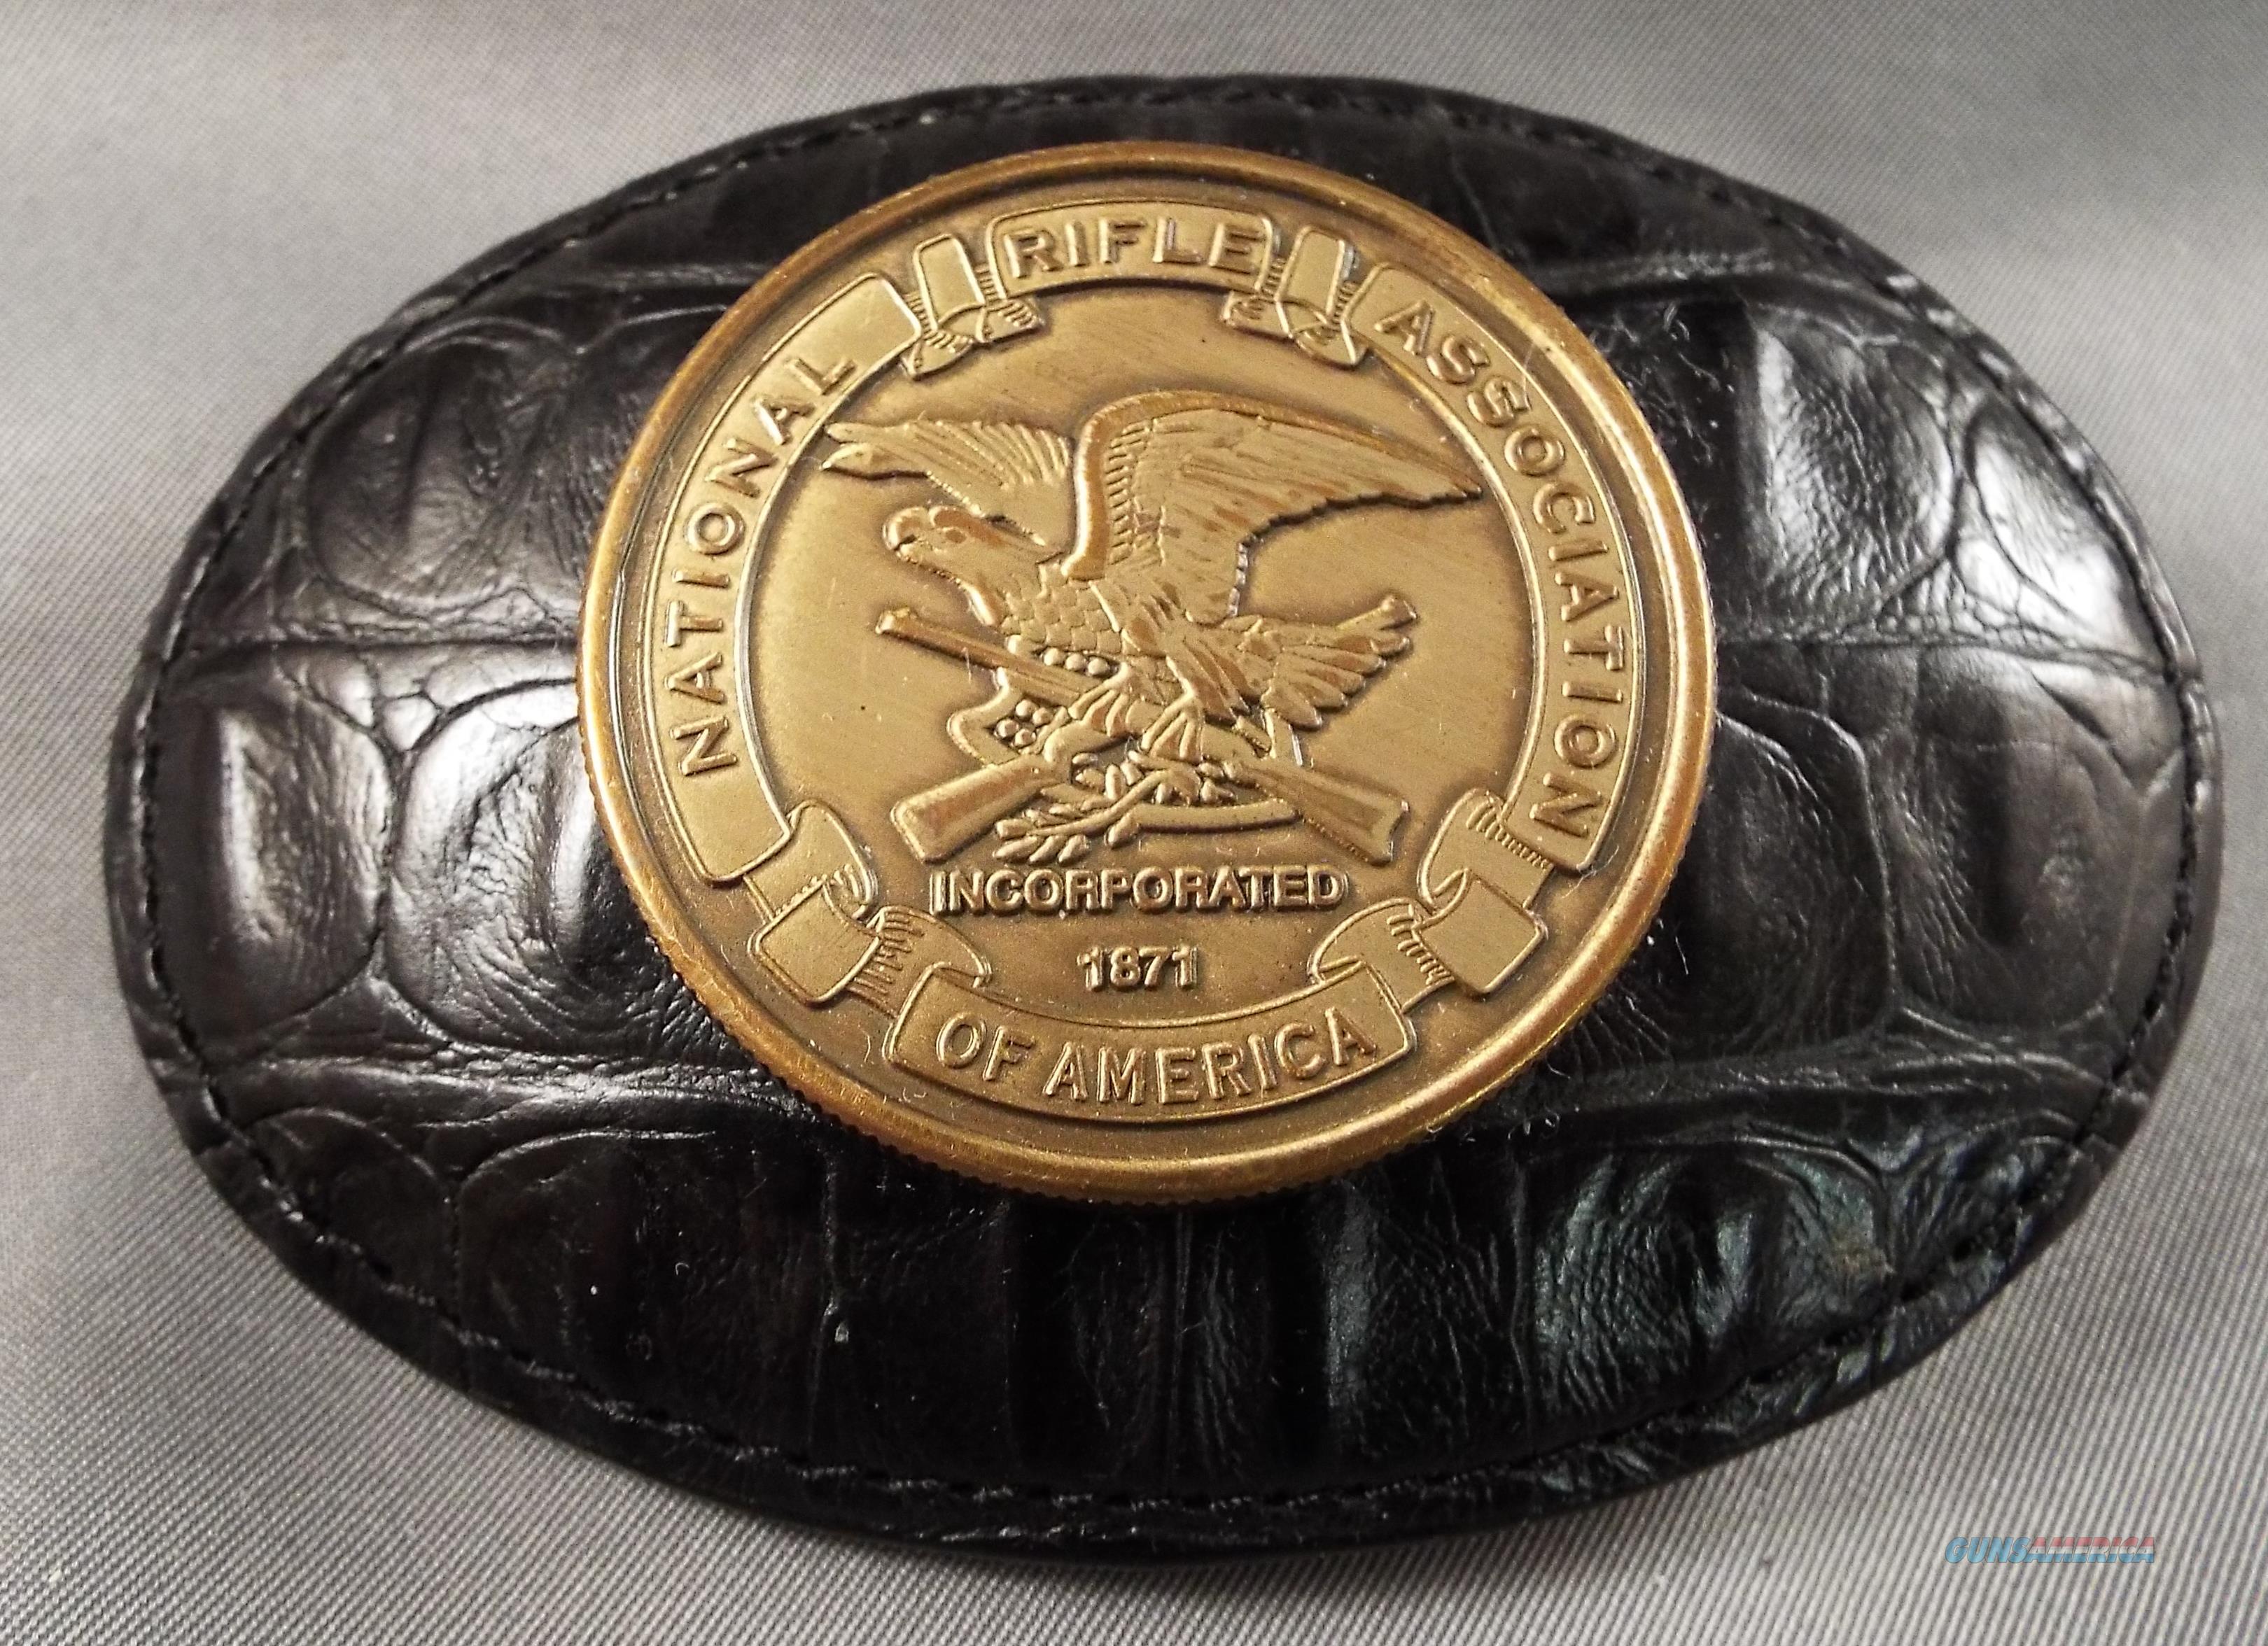 NRA Belt Buckle for sale